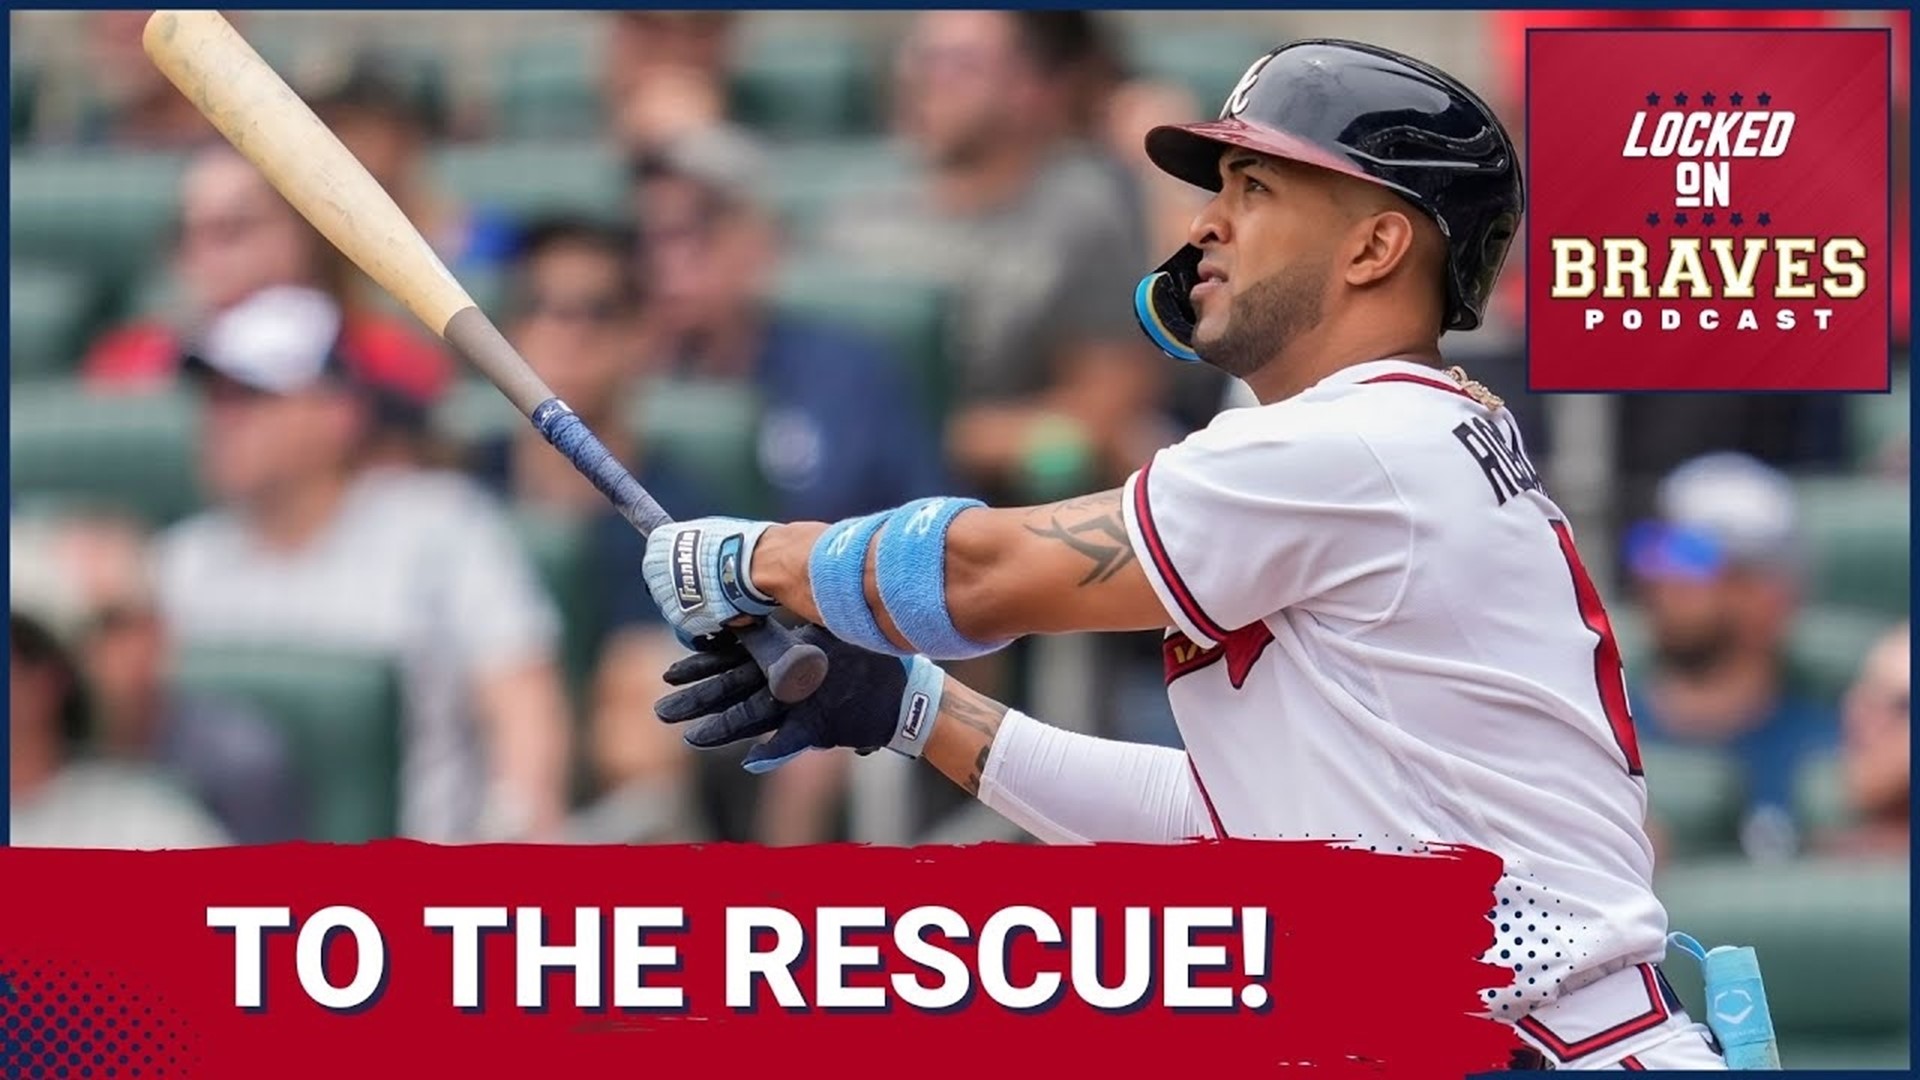 The Atlanta Braves bullpen made things interesting again, but the Eddie Rosario and the offense bailed them out as they take down the Phillies.